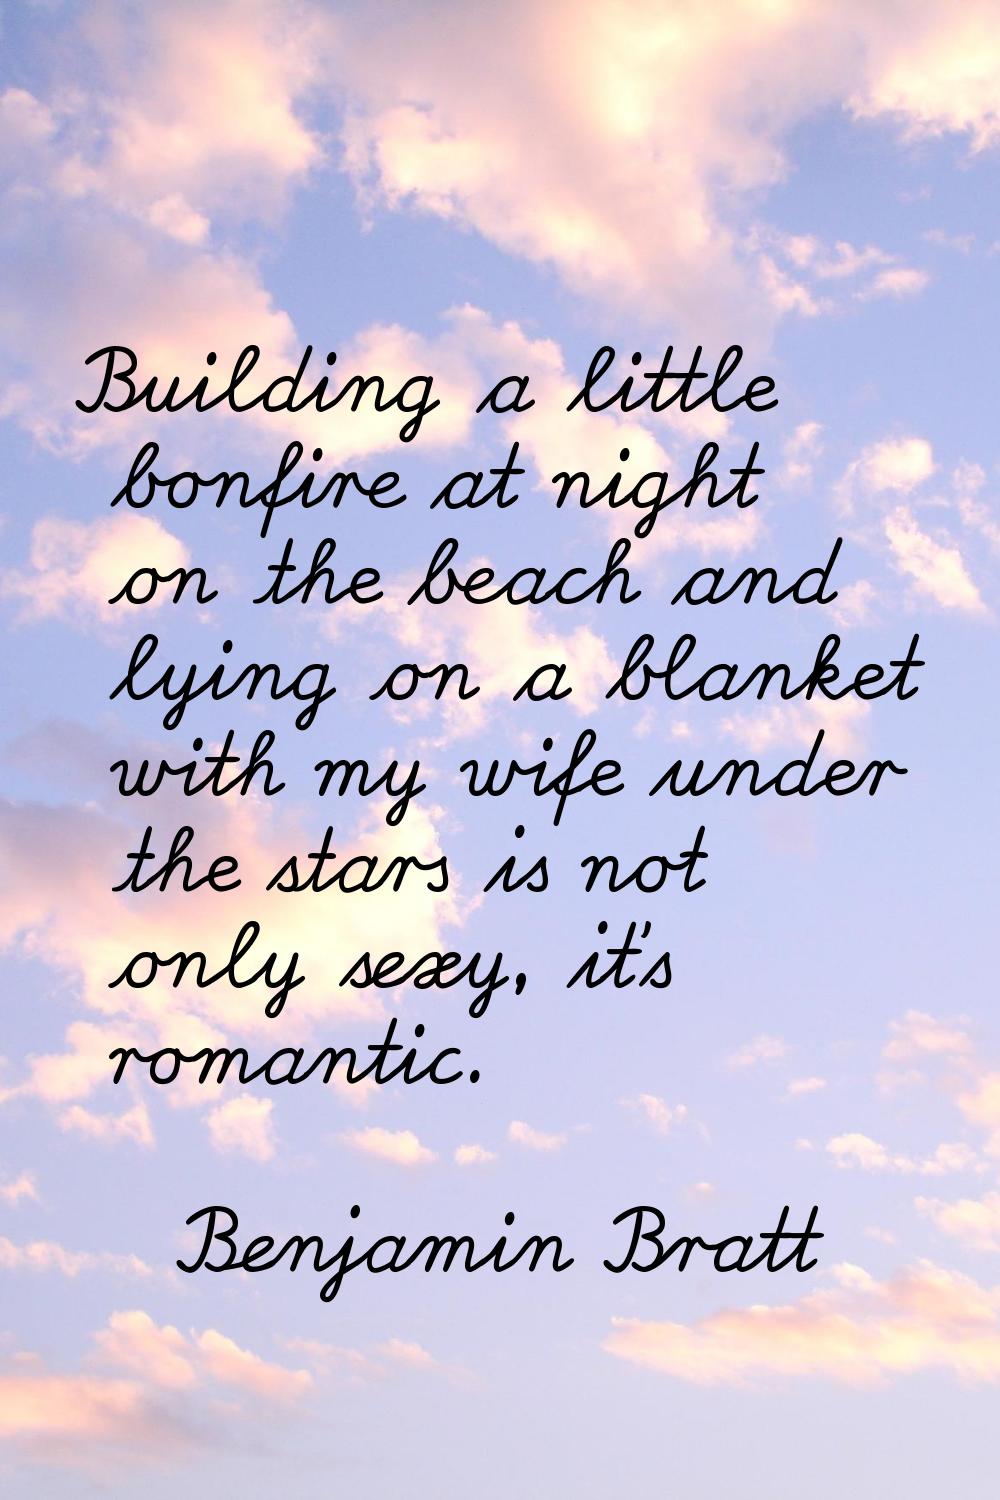 Building a little bonfire at night on the beach and lying on a blanket with my wife under the stars